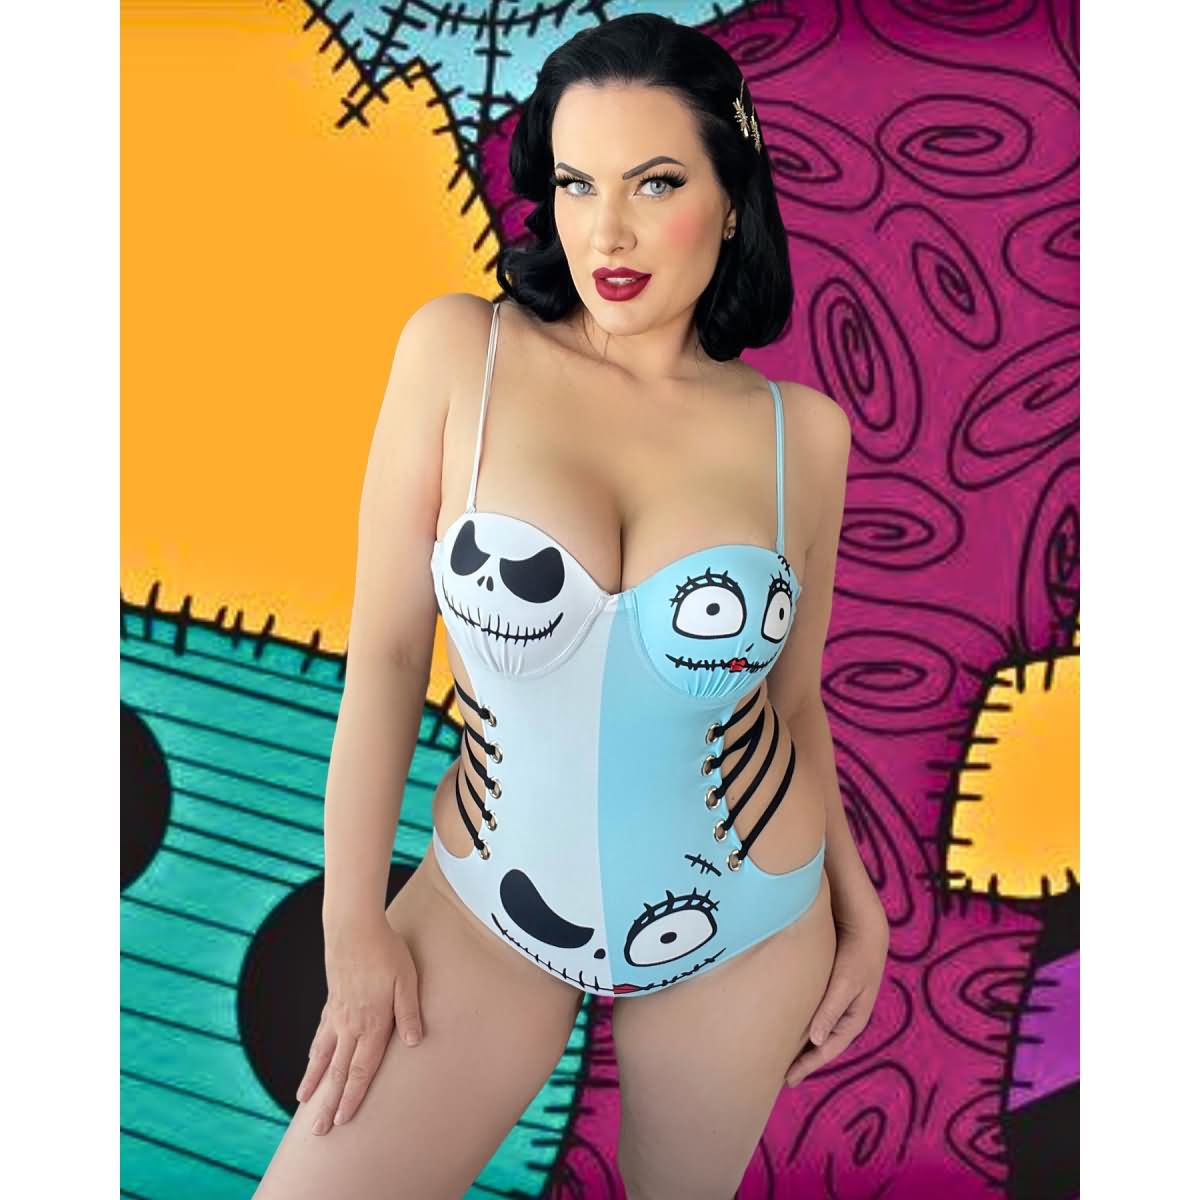 Women's-One-Piece-Swimsuit,-Blue-White-Push-Up-Tummy-Cotrol-Bikini-2Women's One Piece Swimsuit, Blue White Push Up Tummy Cotrol Bikini! This stylish bikini set features a beautiful combination of white and blue, inspired by "Nightmare Movie Art". With UPF 50+ protection and tummy control, feel confident and comfortable while lounging by the pool. Plus, the removable straps allow for versatile styling options. Dive in with ease and style!